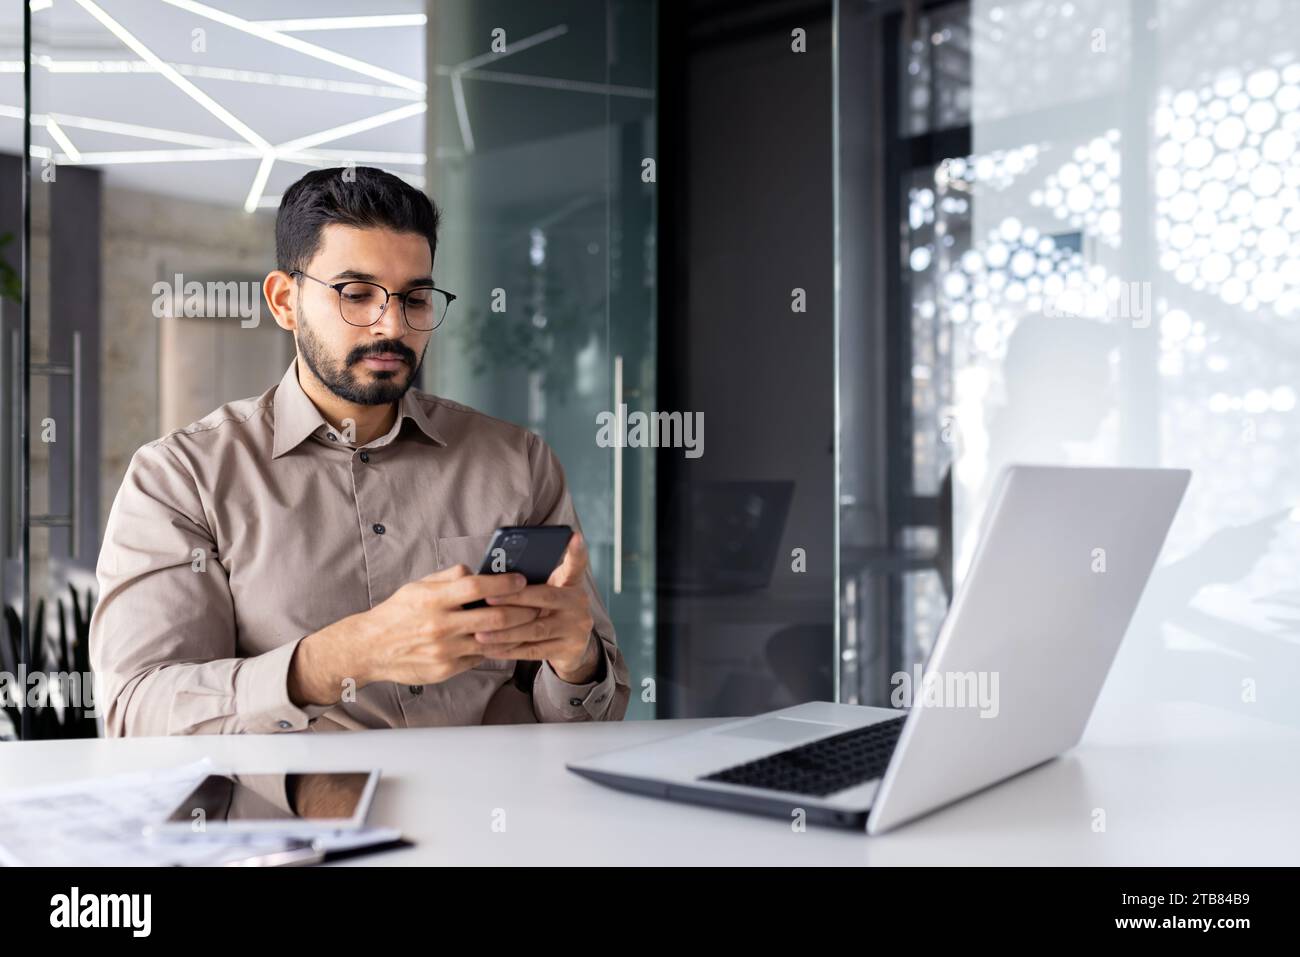 Serious concentrated businessman at the workplace inside the office, the man holds a smartphone in his hands, a worker with a laptop browses the Inter Stock Photo